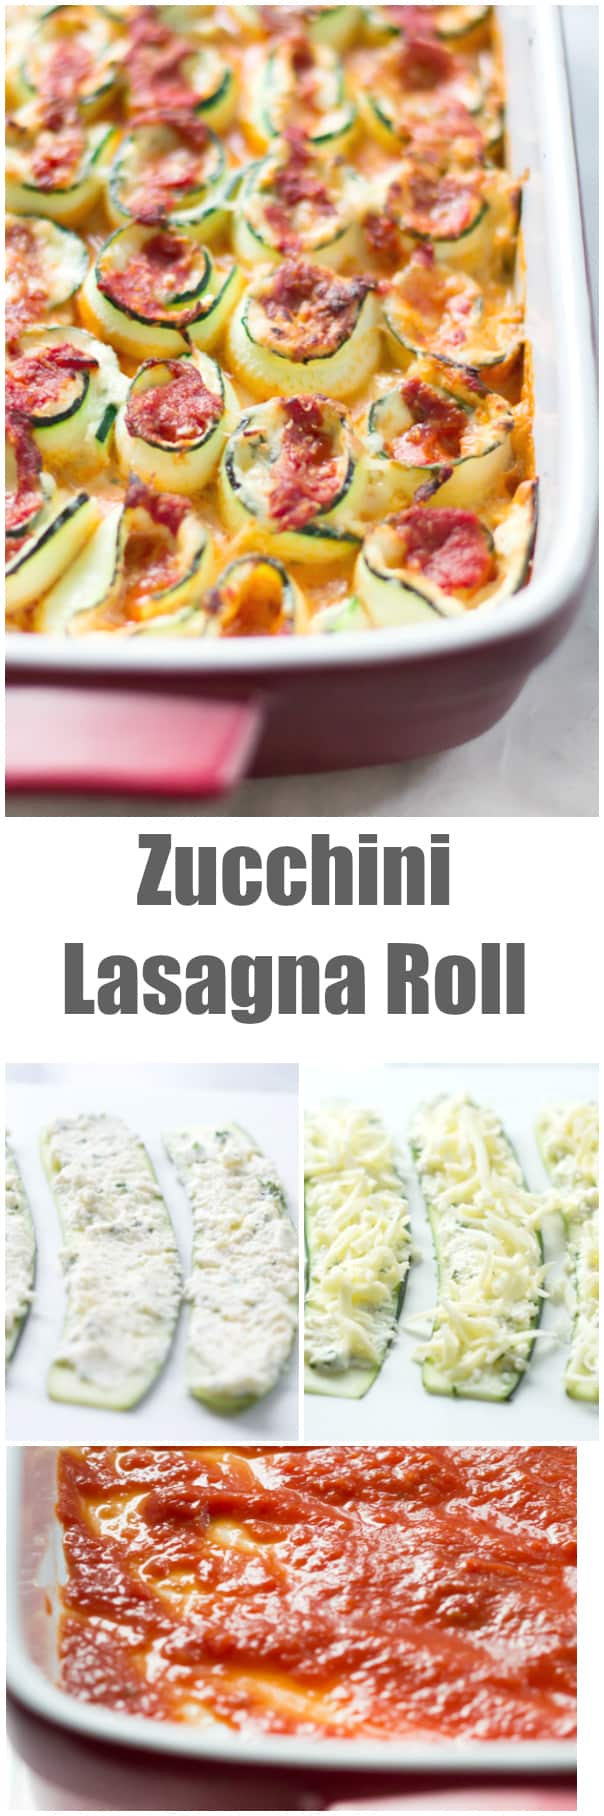 Zucchini Lasagna Roll - This gluten free Zucchini Lasagna Roll is healthy but with all the flavour of the traditional version. It is very easy to make and it is stuffed with zucchini, ricotta, Parmesan and topped with marinara and mozzarella cheese.